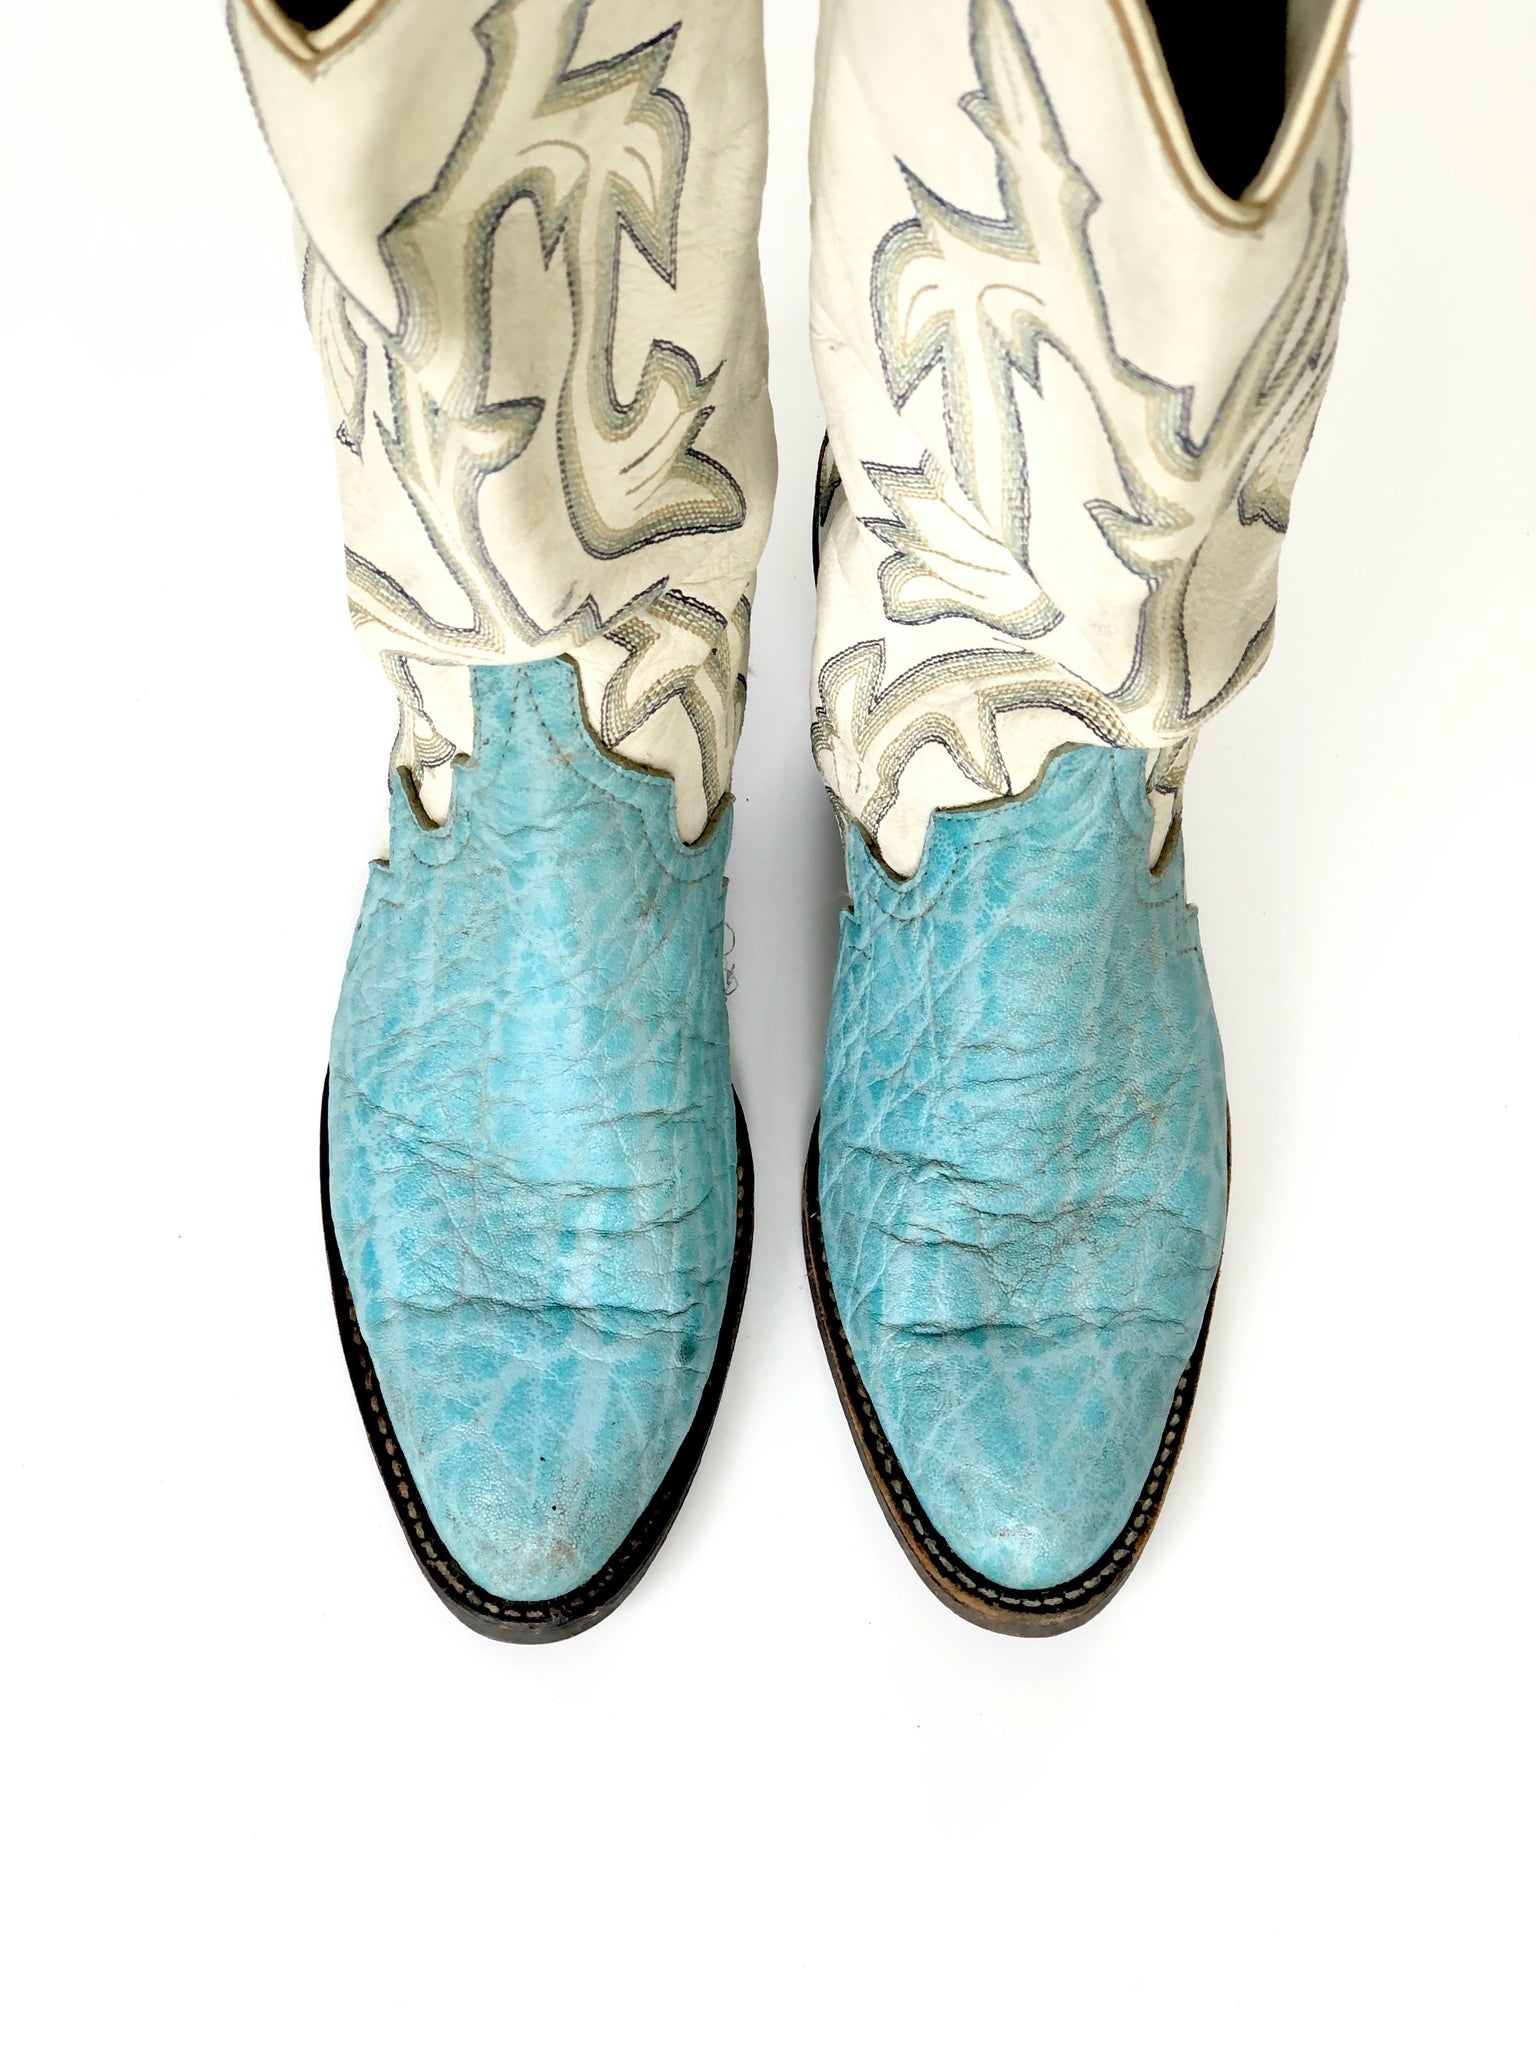 VINTAGE: Baby Blue & White Leather Cowboy Boots